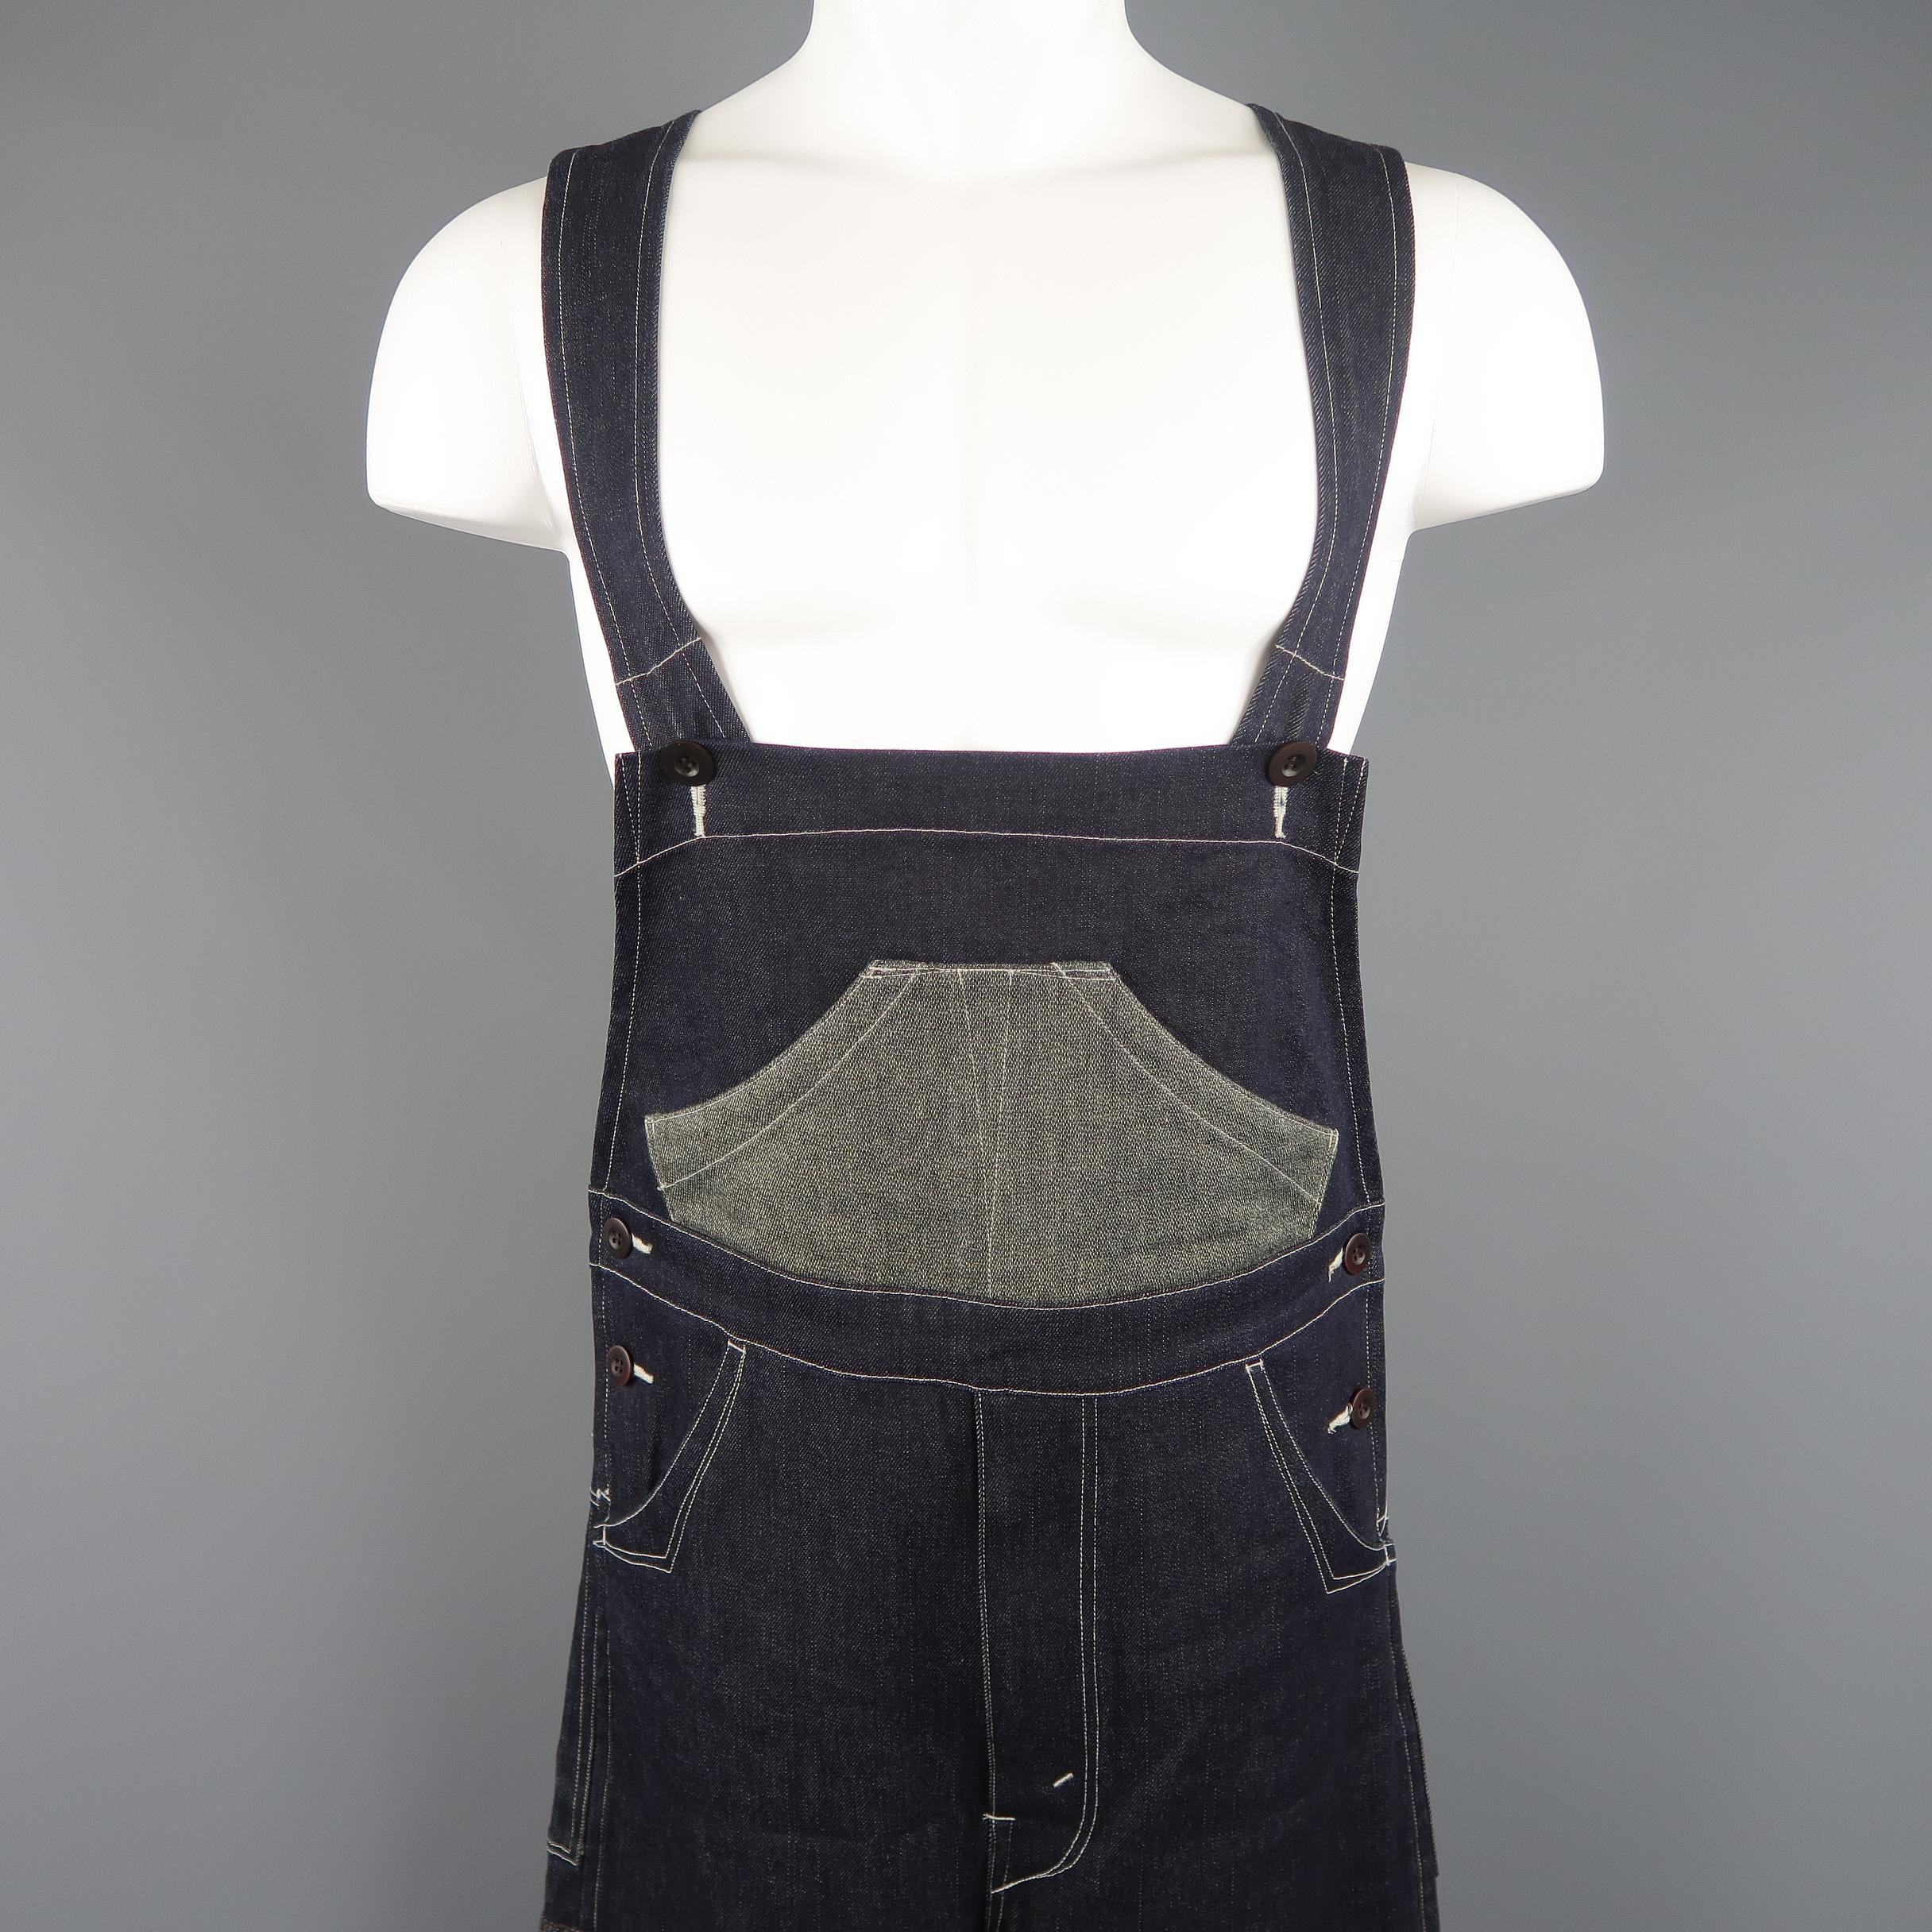 JUNYA WATANABE MAN COMME des GARCONS overalls come in classic indigo blue denim with contrast stitch details, adjustable straps, and brown glenplaid patches. Made in Japan.
 
Excellent Pre-Owned Condition.
Marked: XS
 
Measurements:
 
Waist: 35